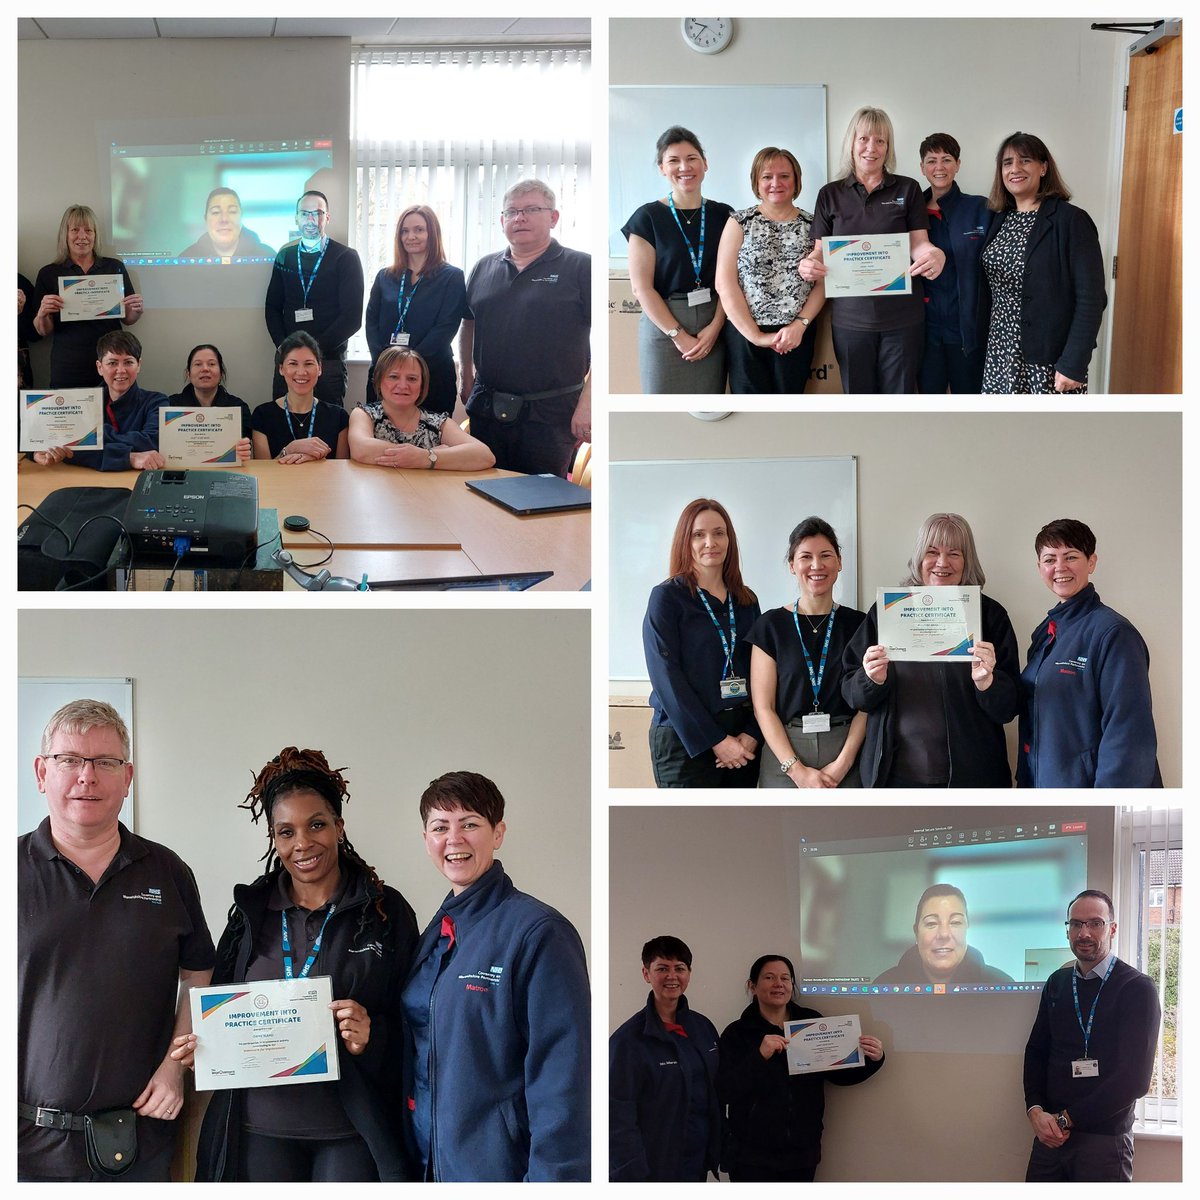 Well done to @CWPT_NHS staff in our secure inpatient services at #BrooklandsHospital for recent participation in #improvment work 👏🙌 #JanetShaw #Malvern #Eden and #Onyx all received #ImprovementIntoPractice certificates yesterday! #Movement4Improvement #QI #NHS @sonya_gardiner